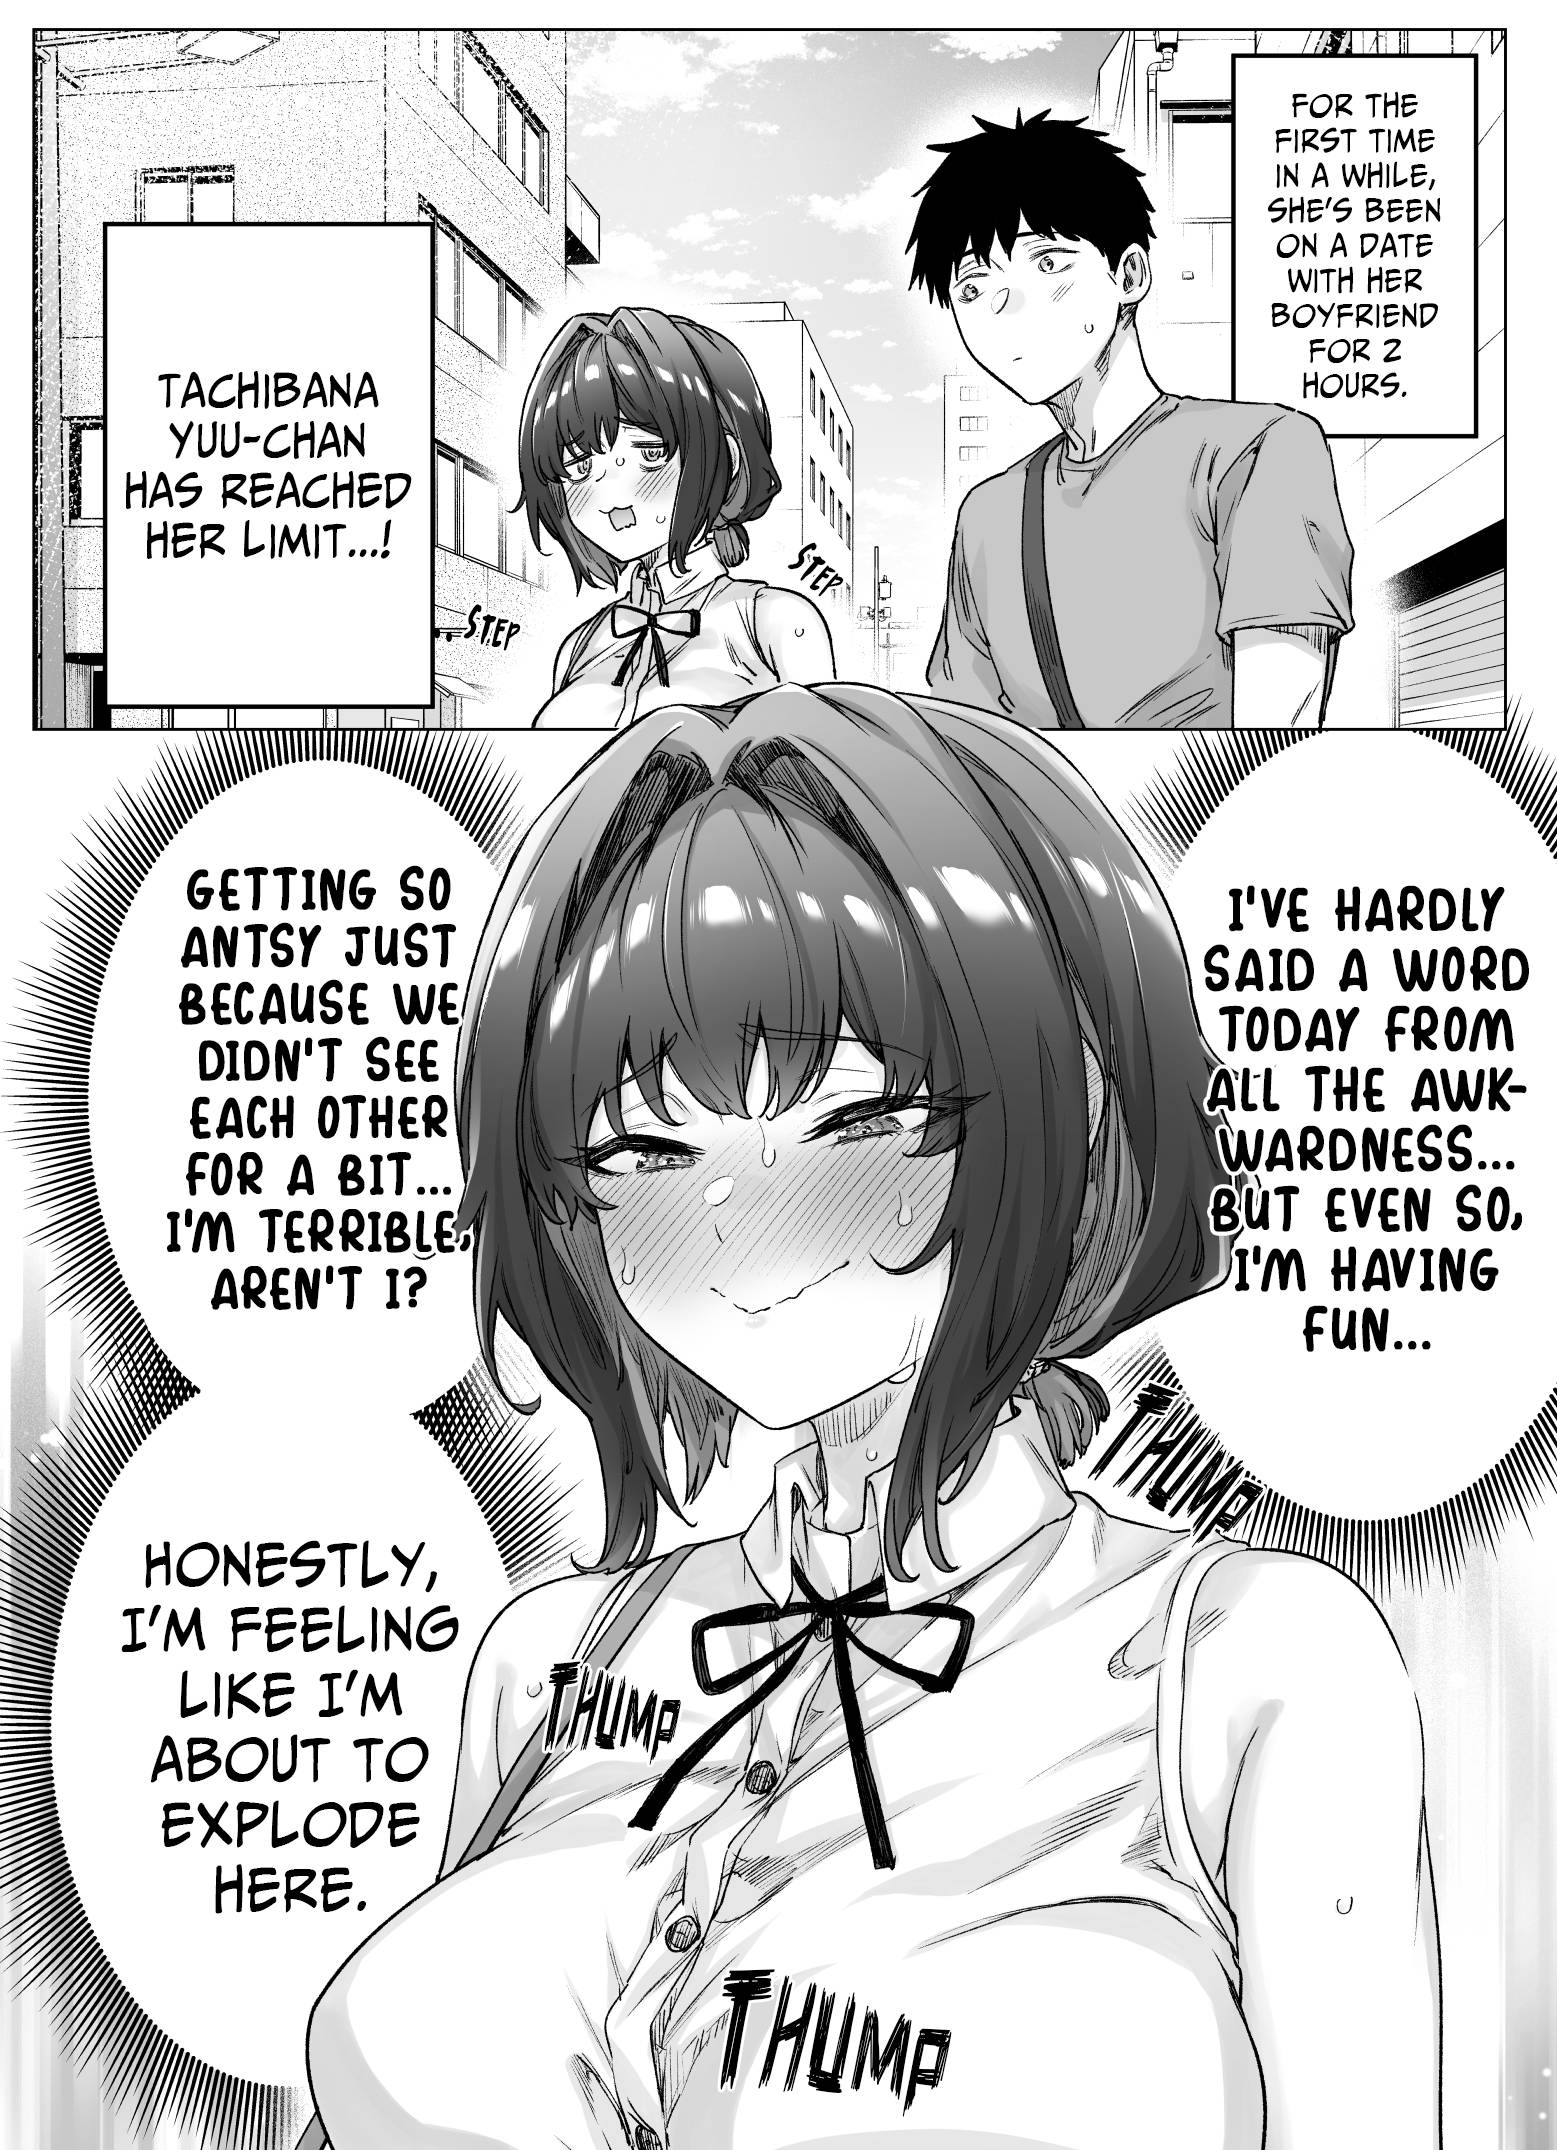 The Tsuntsuntsuntsuntsuntsun Tsuntsuntsuntsuntsundere Girl Getting Less And Less Tsun Day By Day - chapter 85 - #1